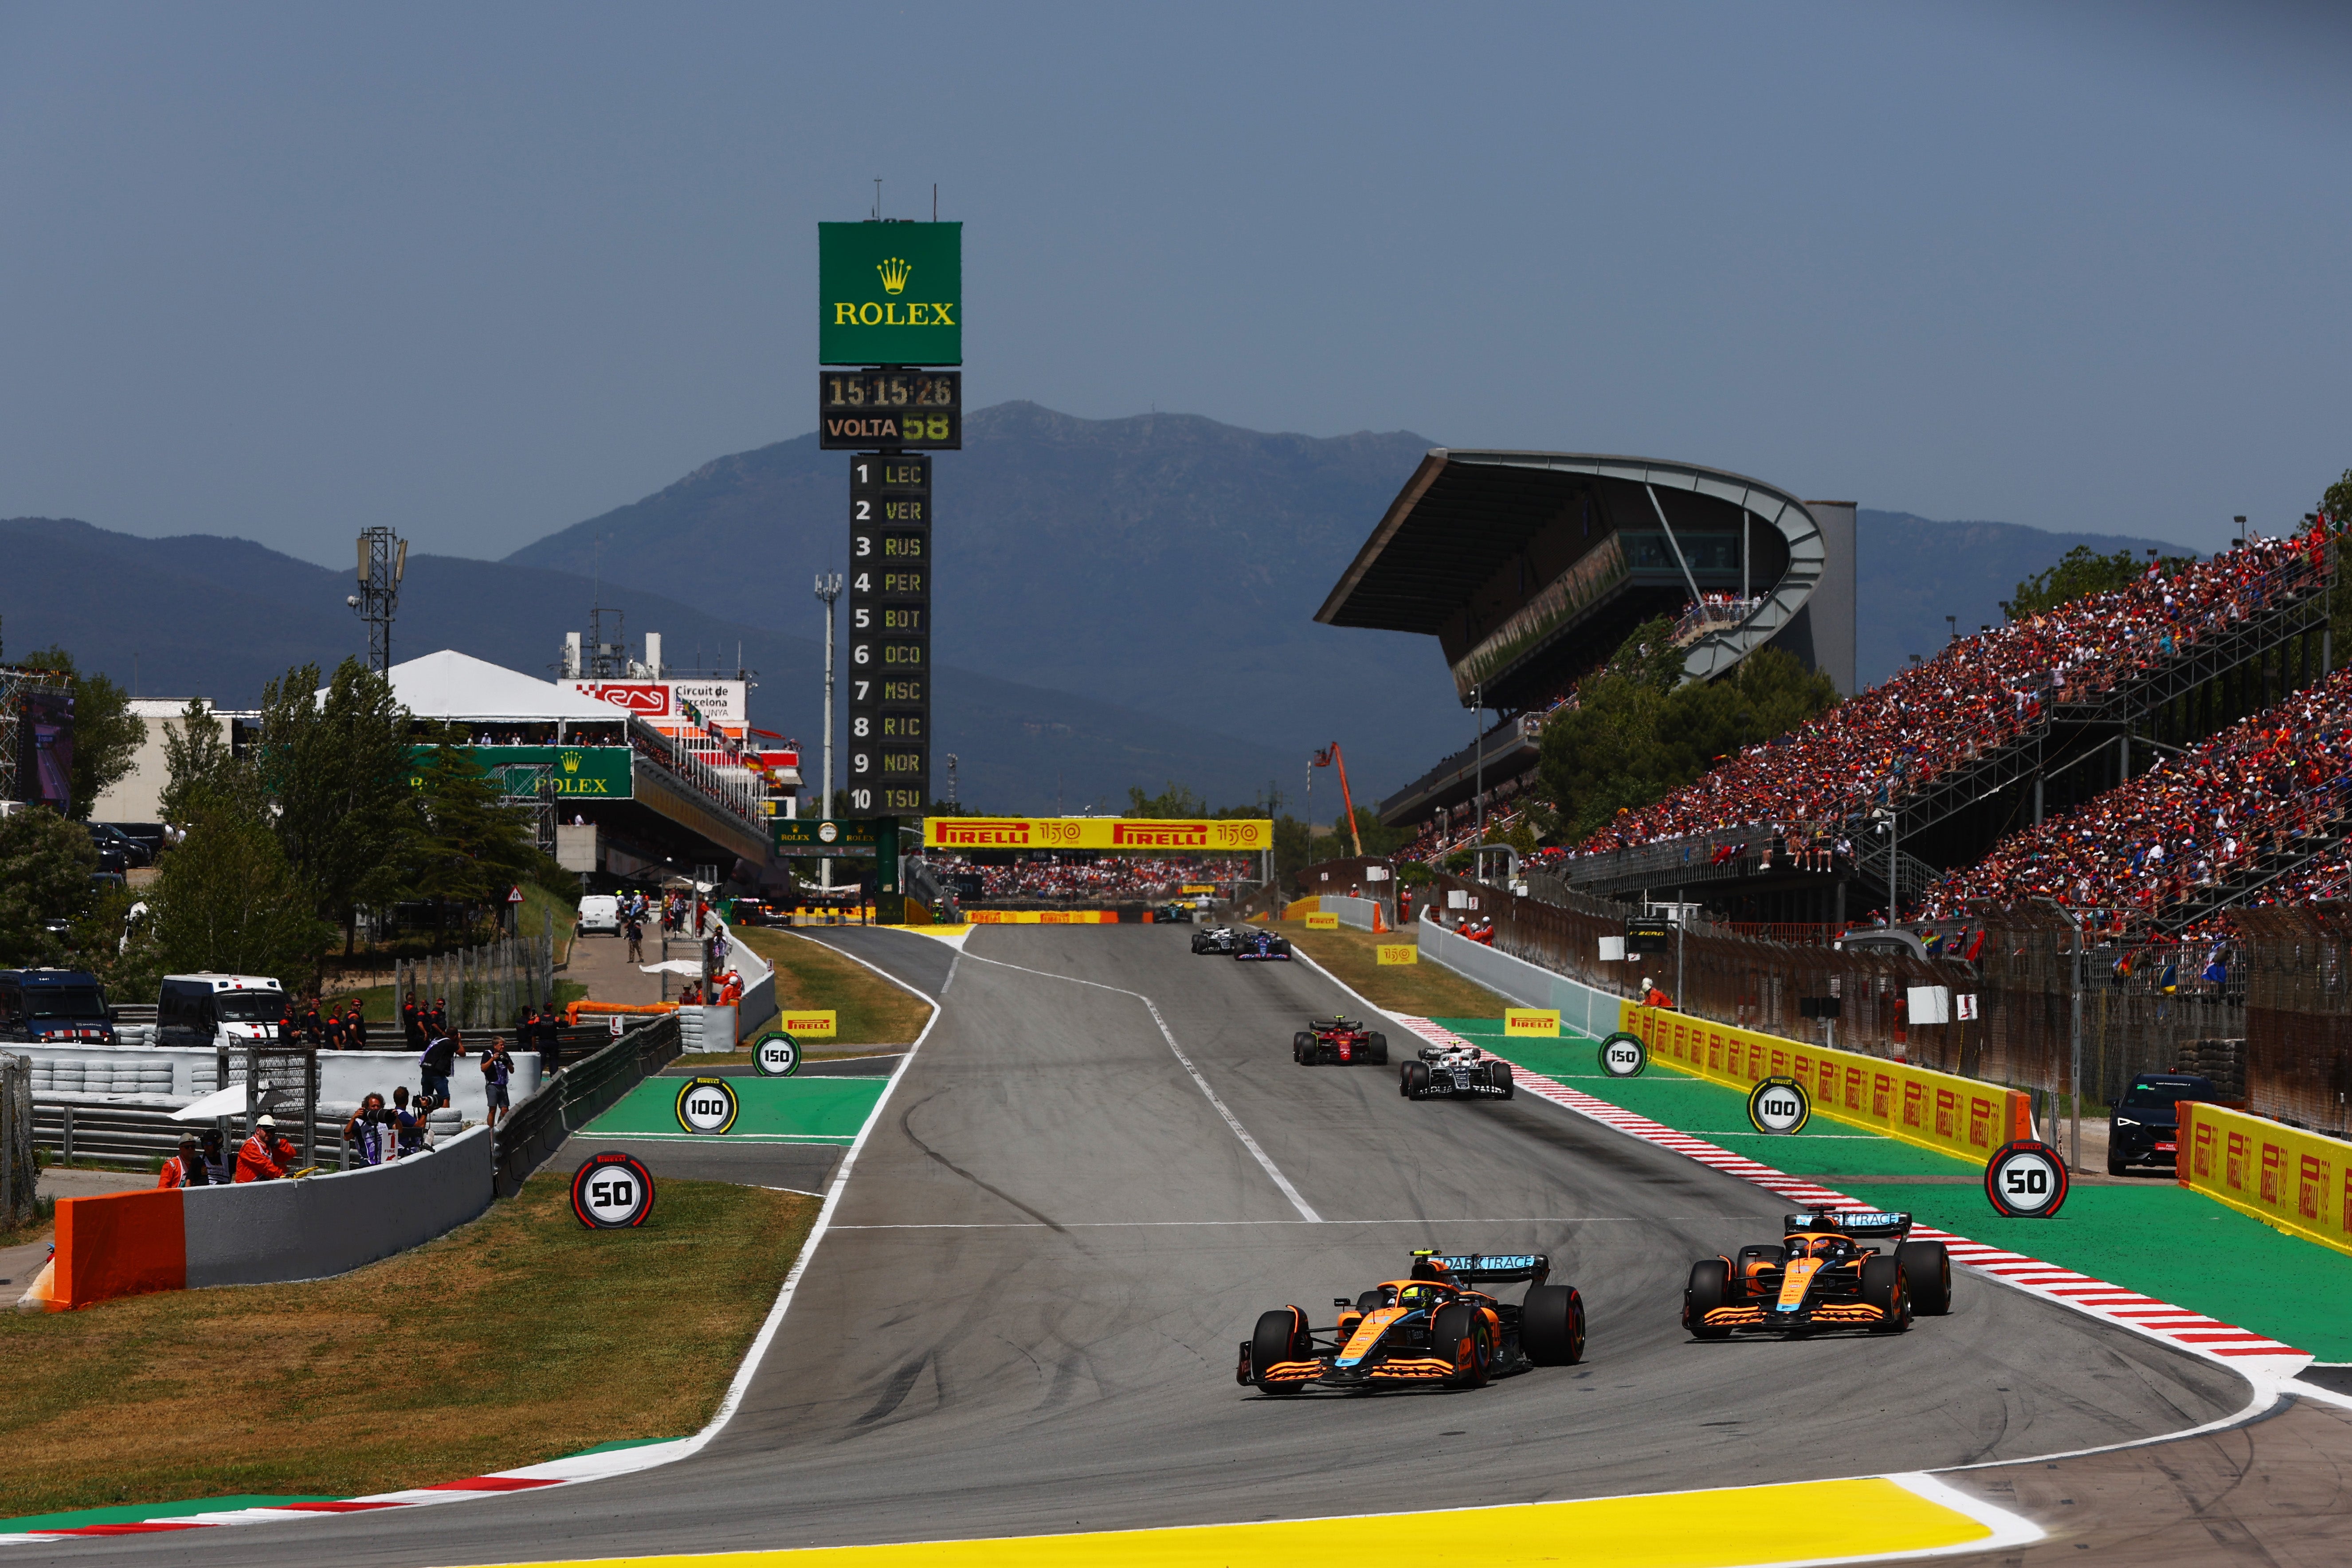 The Circuit de Barcelona-Catalunya has hosted the Spanish Grand Prix since 1991